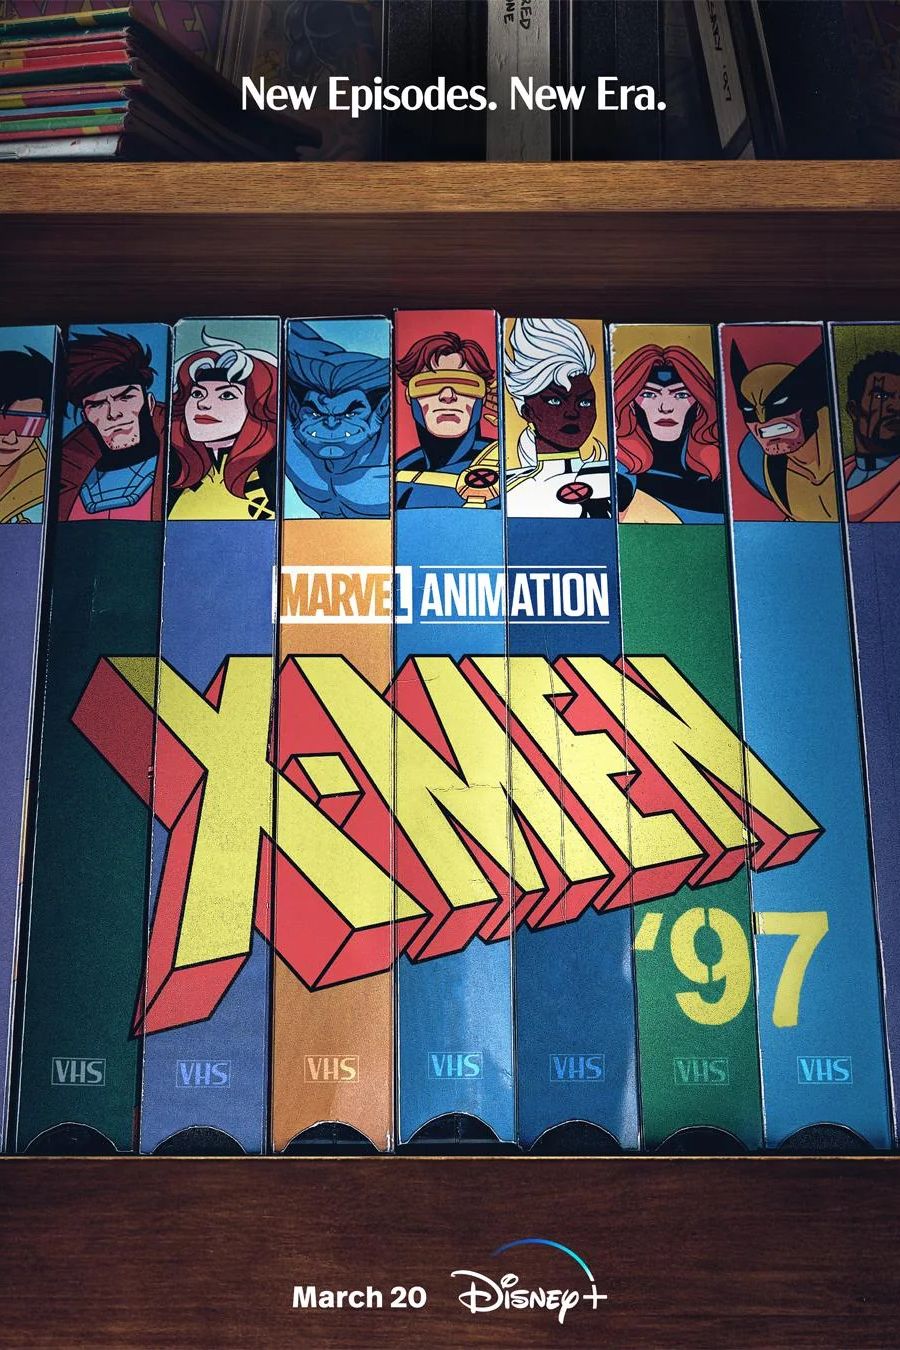 Marvel’s X-Men ’97 First Social Media Reactions Are Here